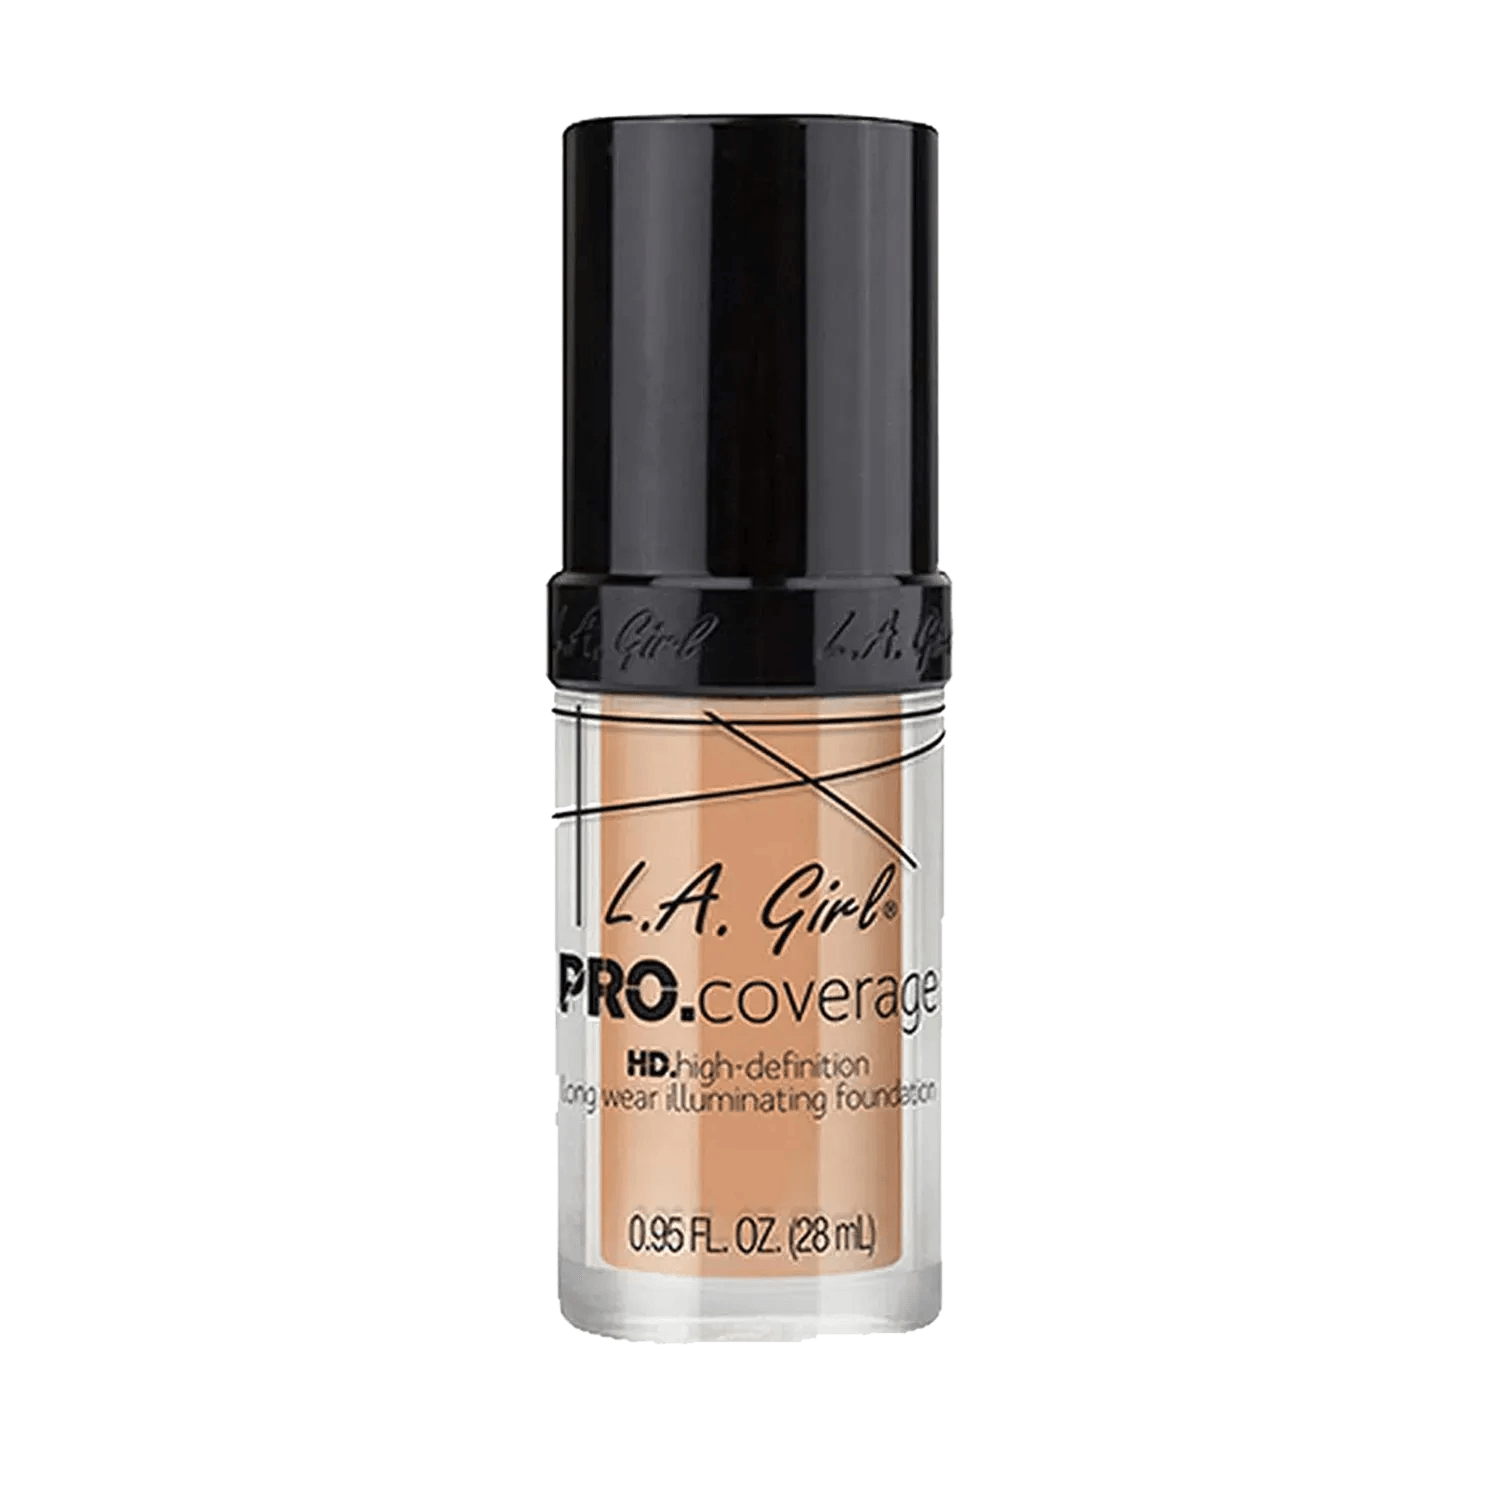 L.A. Girl | L.A. Girl PRO Coverage HD Foundation Porcelain (28ml)